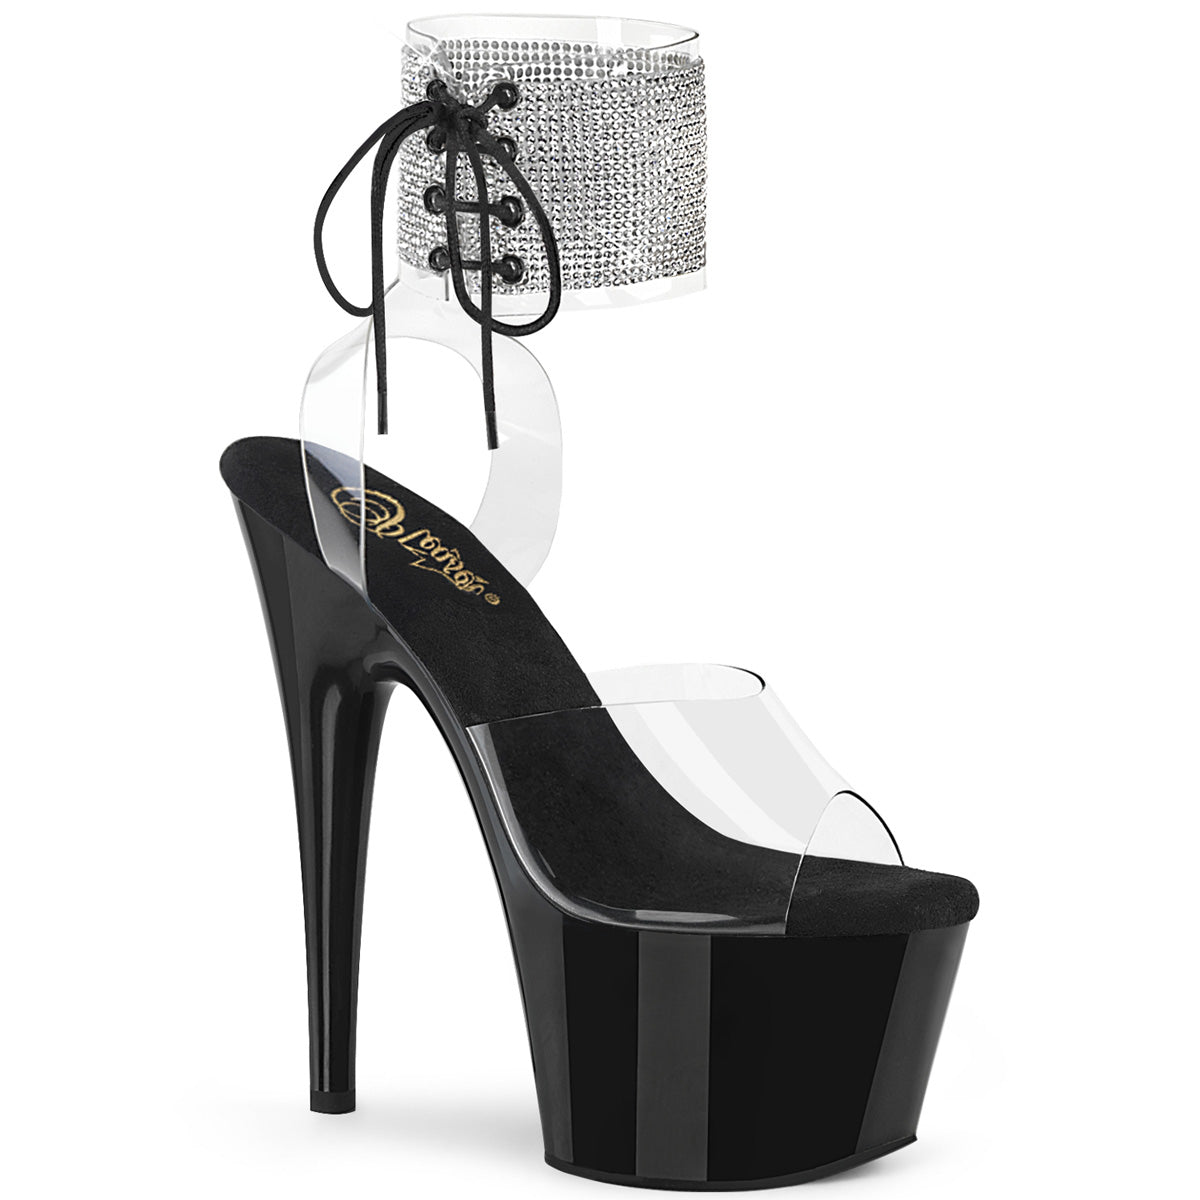 ADORE-791-2RS Pleasers Black Platform Exotic Dancing Bling Ankle Cuff Heels